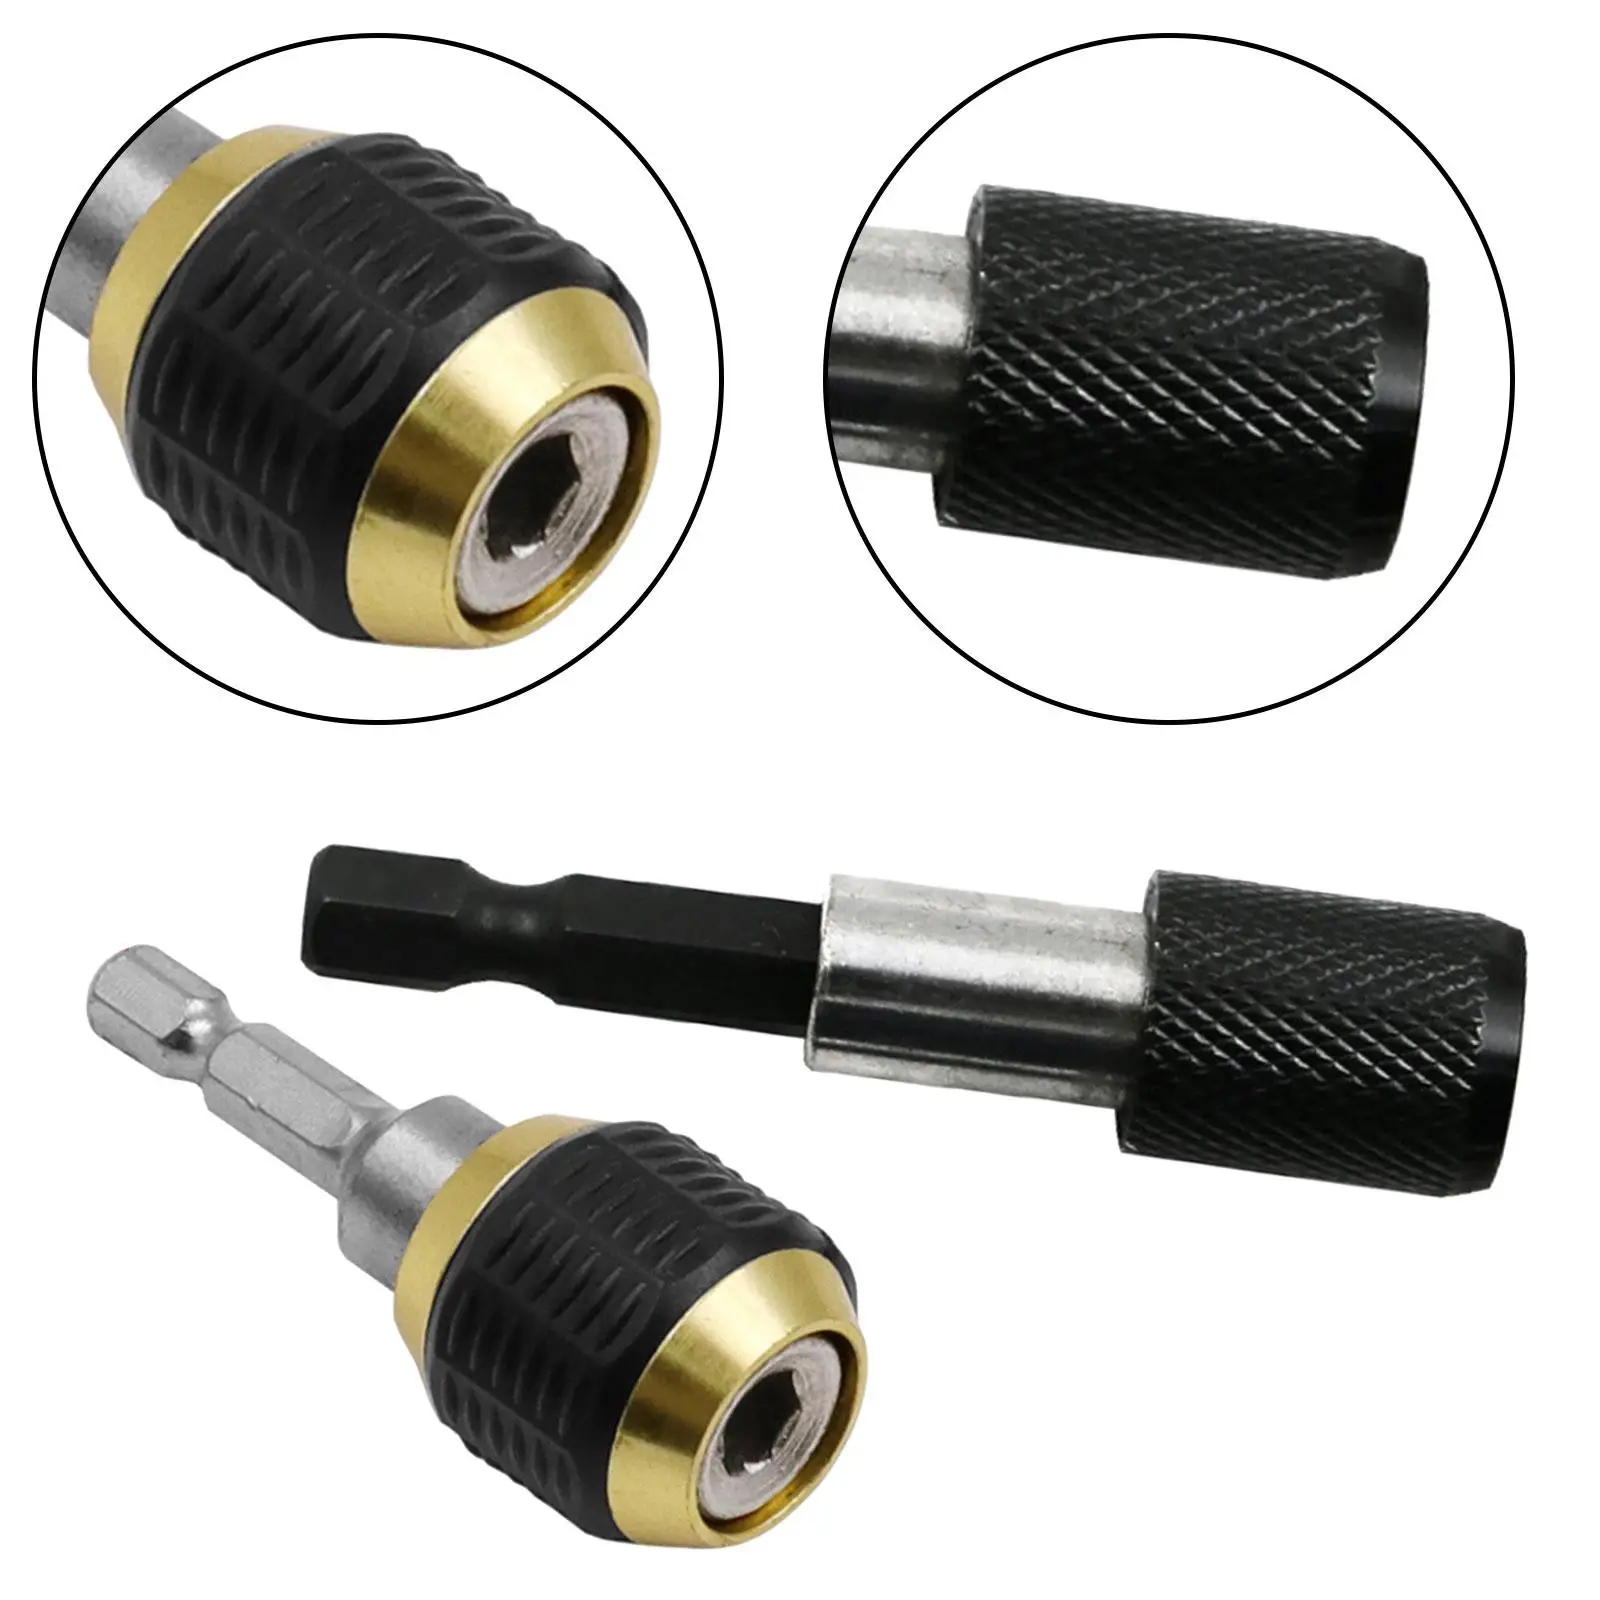 Universal Drill Quick Change Adapter Drill Converter protection Screwdriver Clamping Capacity for Replaces Accessory